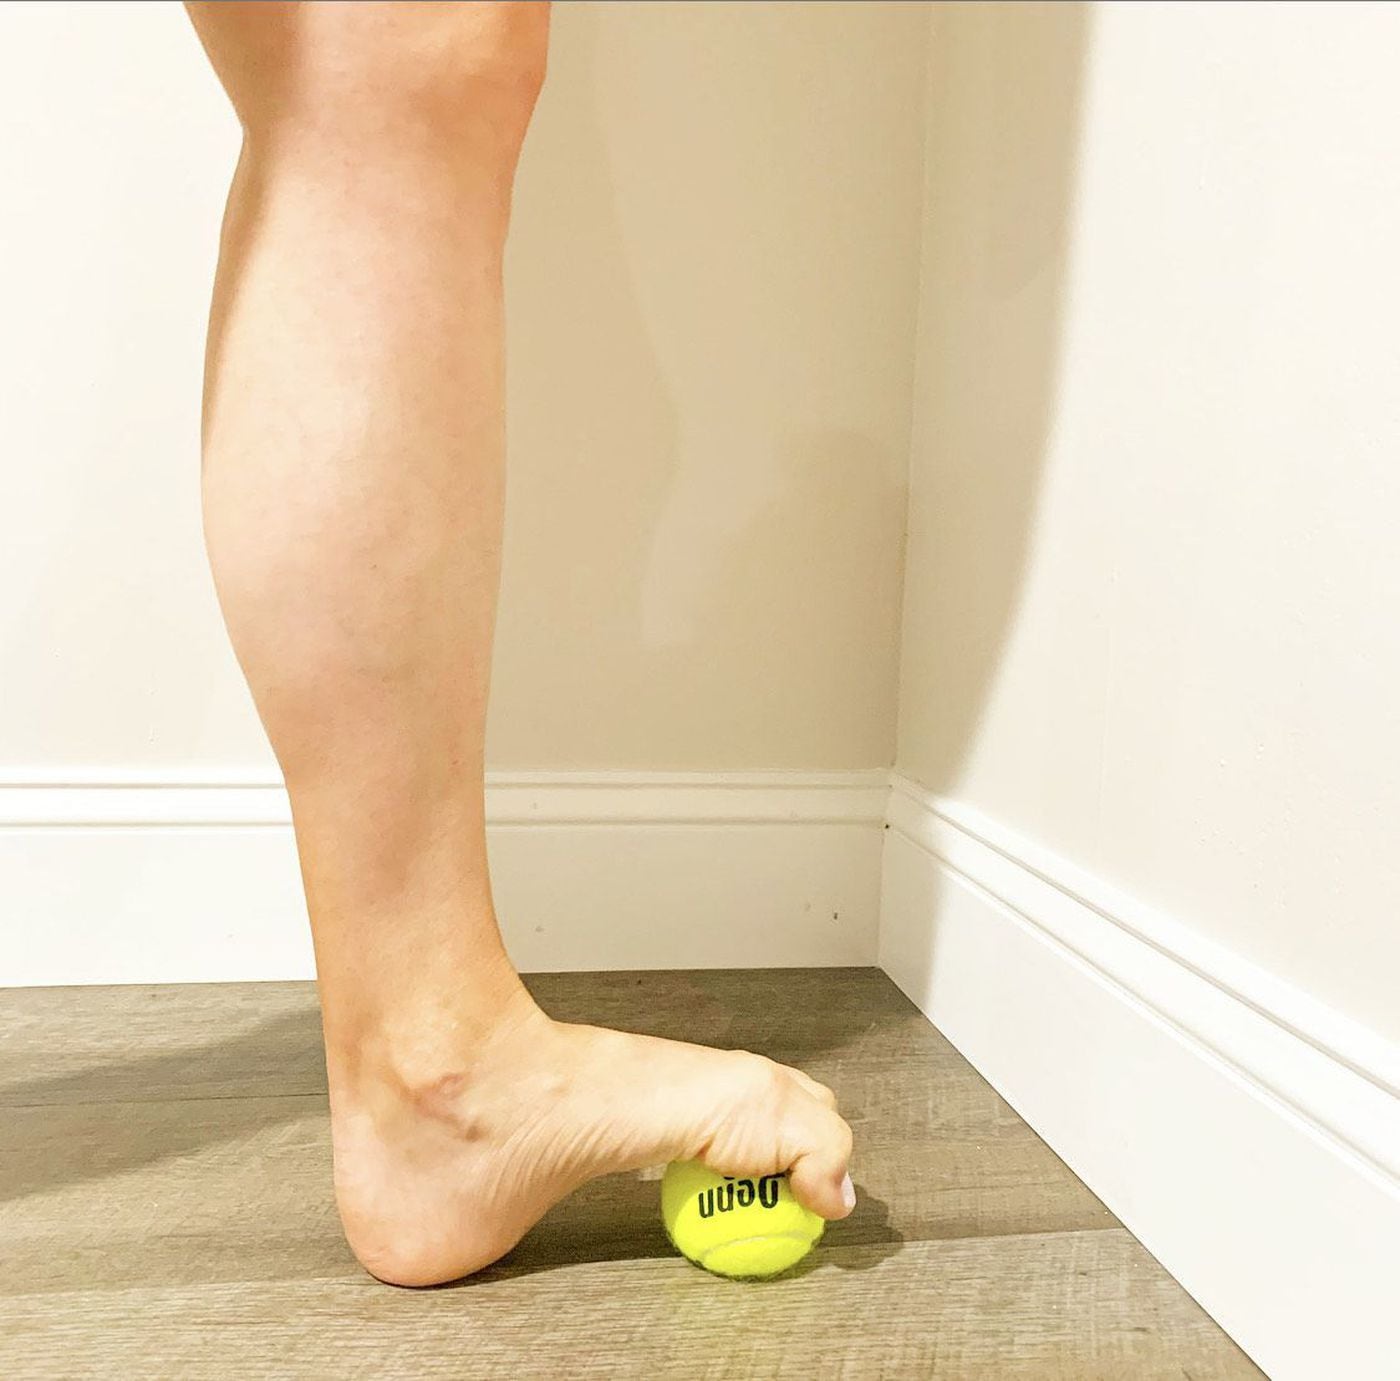 At Home Exercises To Help Aching Feet